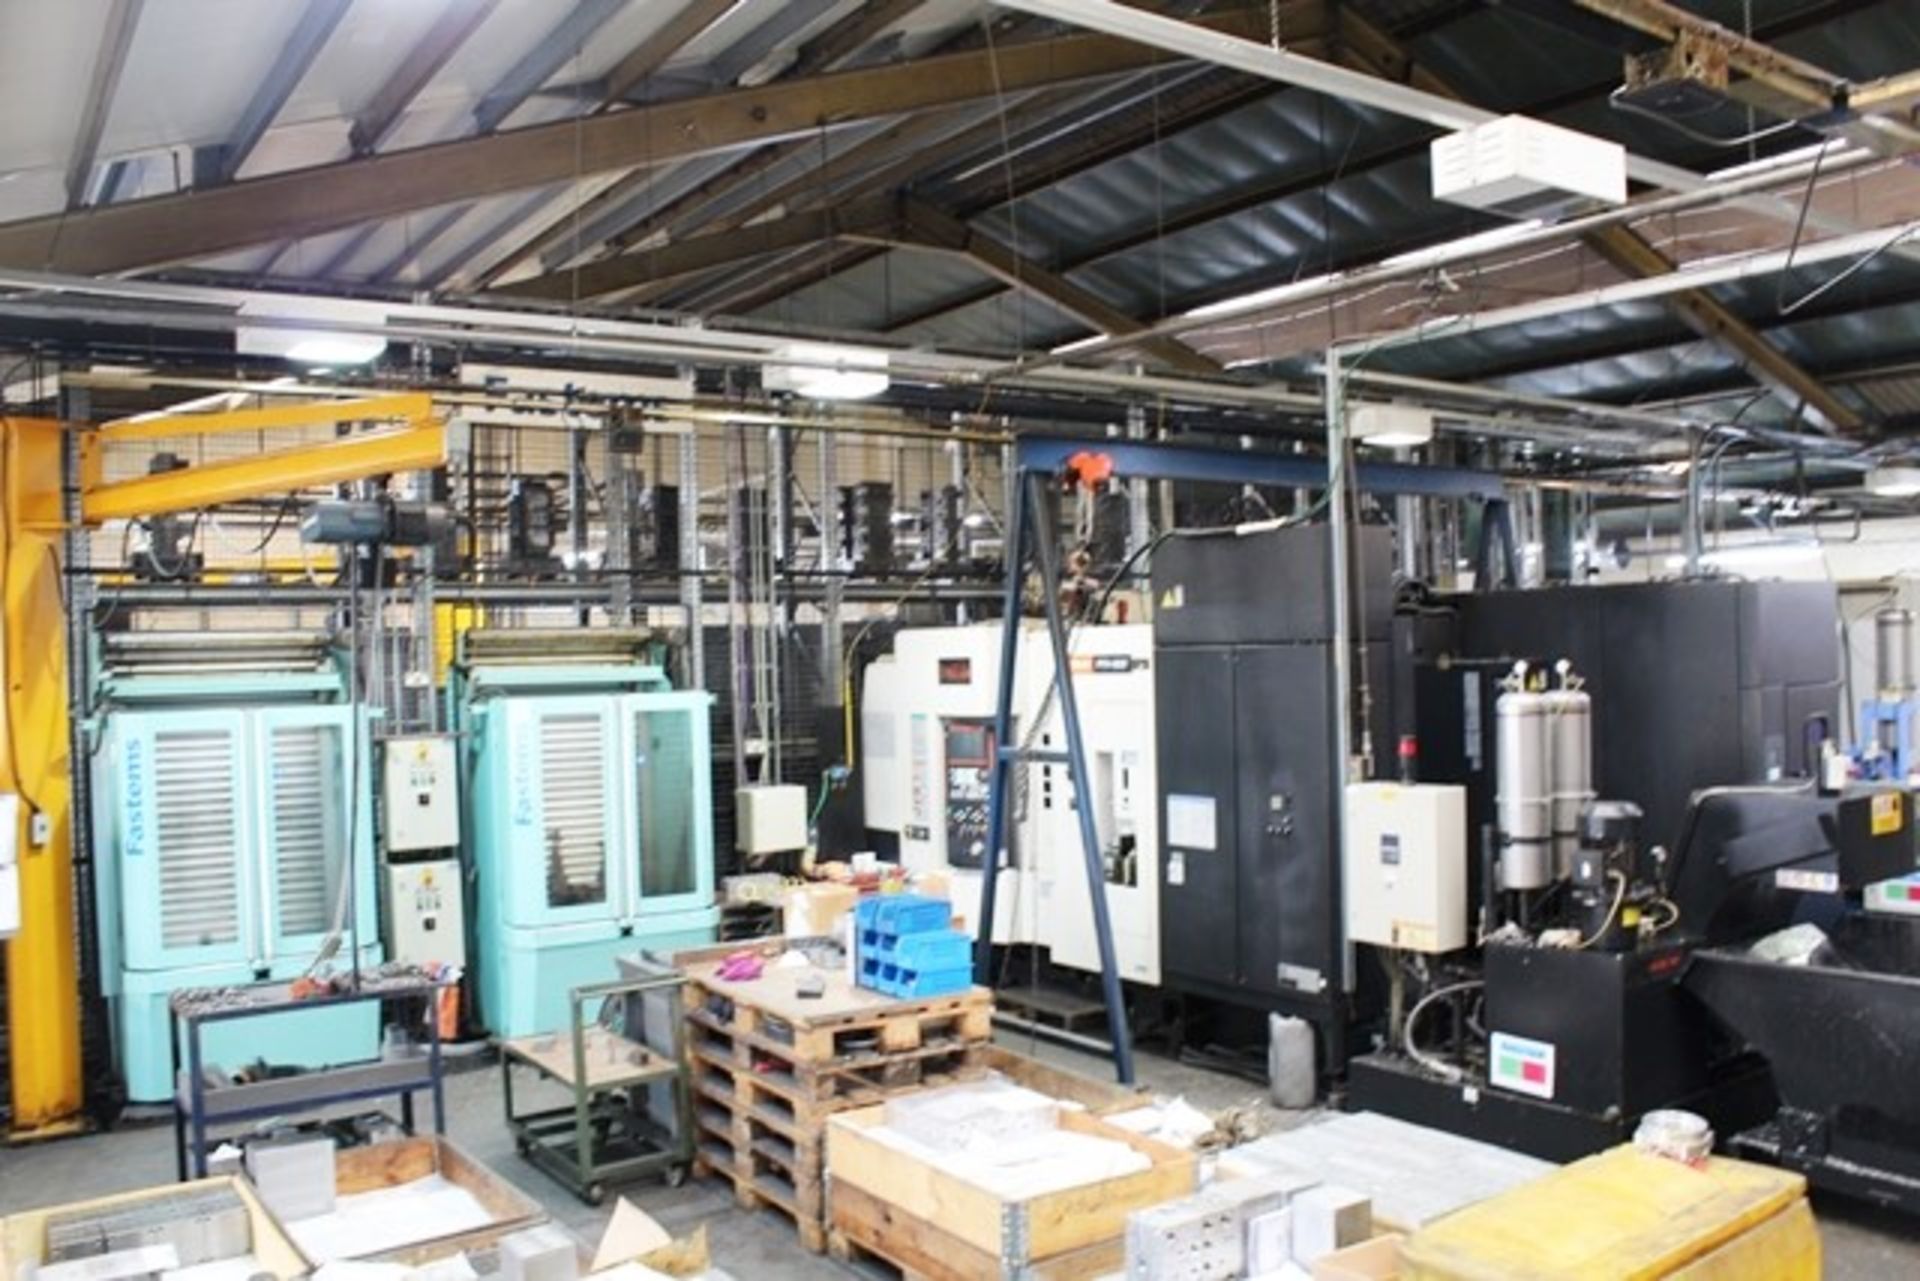 All inclusive bid for lots 3 to 9 as a whole - Mazak/Fastems CNC 48 pallet/3 maching centre...